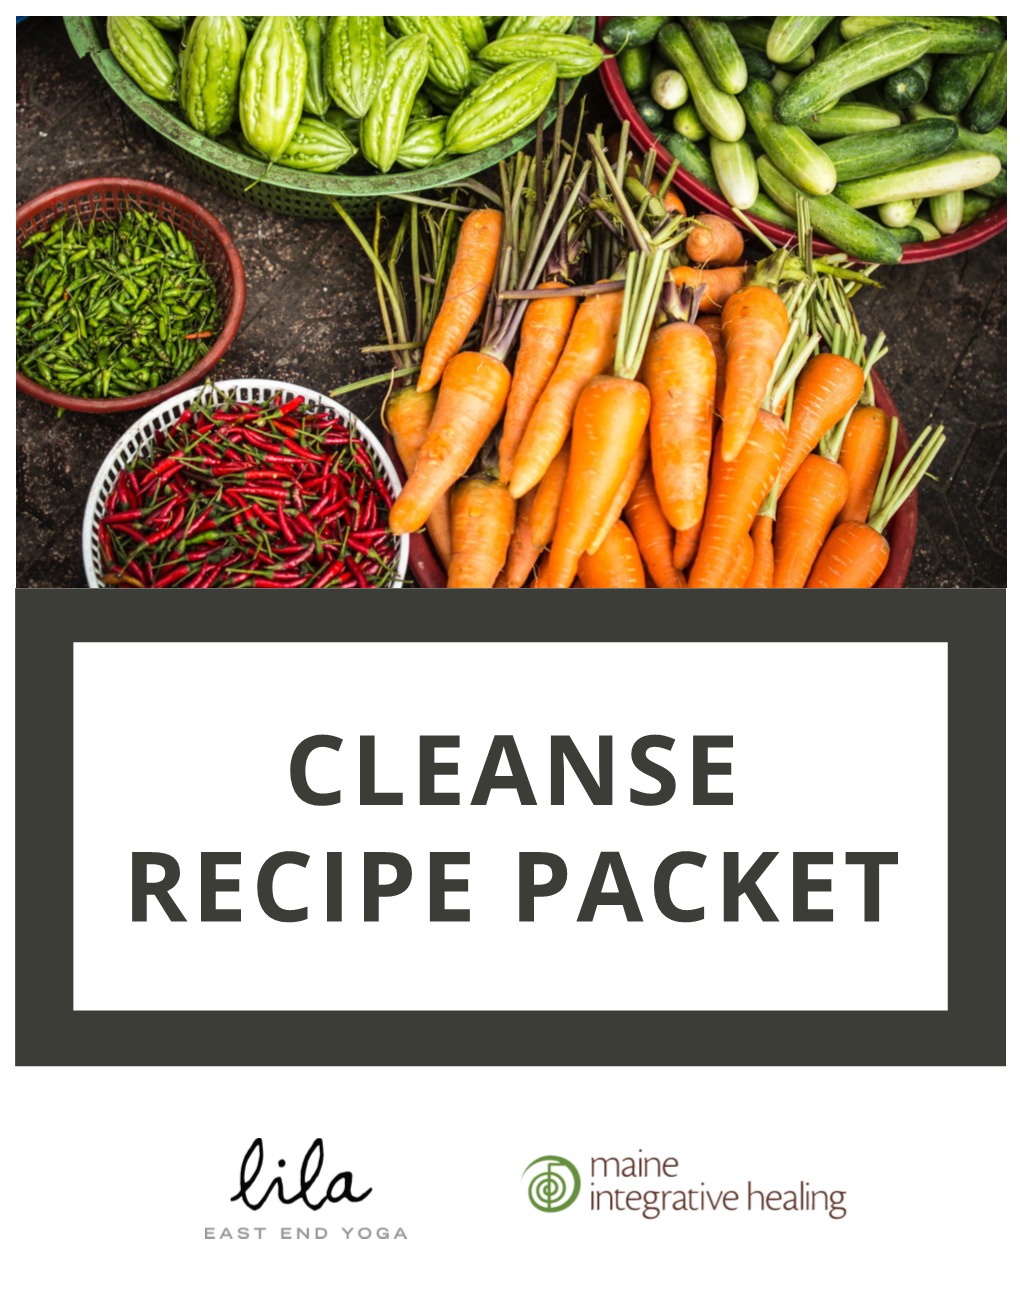 CLEANSE RECIPE PACKET Fall P Spring E These Symbols Represent Which Season the Listed Foods Are Best Consumed to Support Strong Digestion and Welcome Seasonal Balance